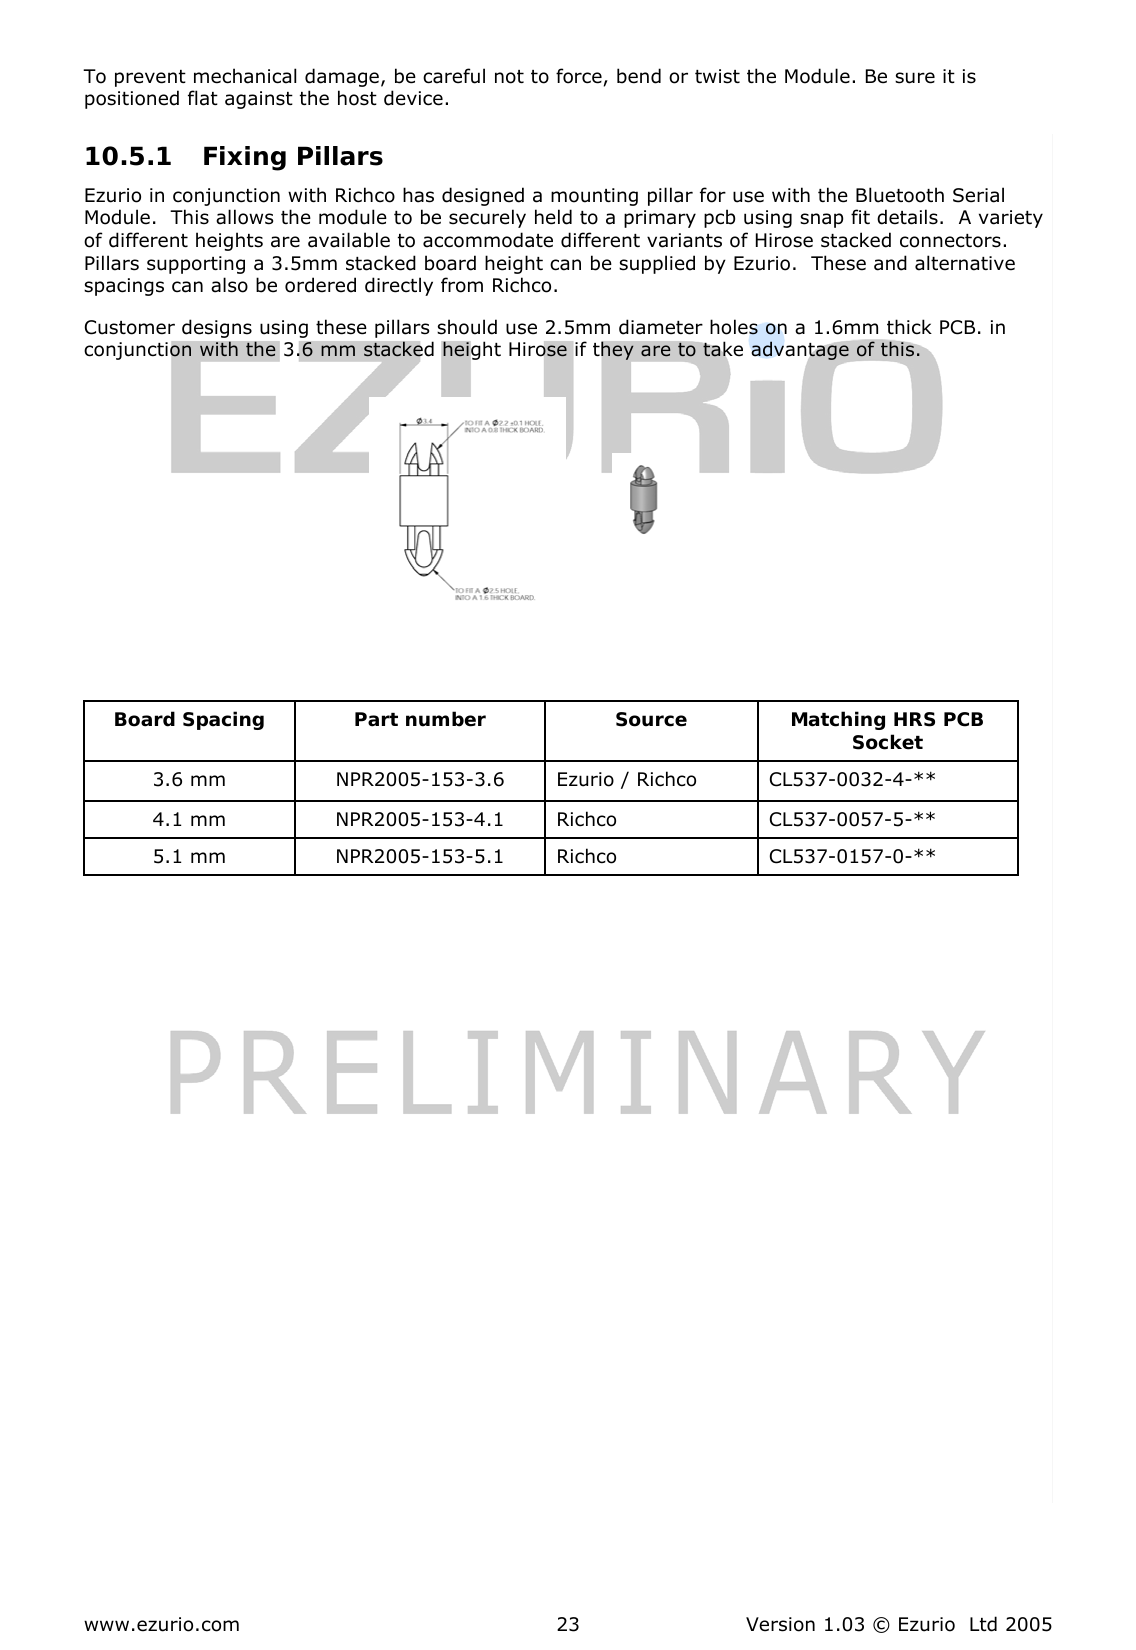  www.ezurio.com  Version 1.03 © Ezurio  Ltd 2005 23To prevent mechanical damage, be careful not to force, bend or twist the Module. Be sure it is positioned flat against the host device.  10.5.1 Fixing Pillars  Ezurio in conjunction with Richco has designed a mounting pillar for use with the Bluetooth Serial Module.  This allows the module to be securely held to a primary pcb using snap fit details.  A variety of different heights are available to accommodate different variants of Hirose stacked connectors.  Pillars supporting a 3.5mm stacked board height can be supplied by Ezurio.  These and alternative spacings can also be ordered directly from Richco. Customer designs using these pillars should use 2.5mm diameter holes on a 1.6mm thick PCB. in conjunction with the 3.6 mm stacked height Hirose if they are to take advantage of this.           Board Spacing  Part number  Source   Matching HRS PCB Socket 3.6 mm  NPR2005-153-3.6  Ezurio / Richco  CL537-0032-4-**  4.1 mm  NPR2005-153-4.1  Richco  CL537-0057-5-**  5.1 mm  NPR2005-153-5.1  Richco   CL537-0157-0-**   